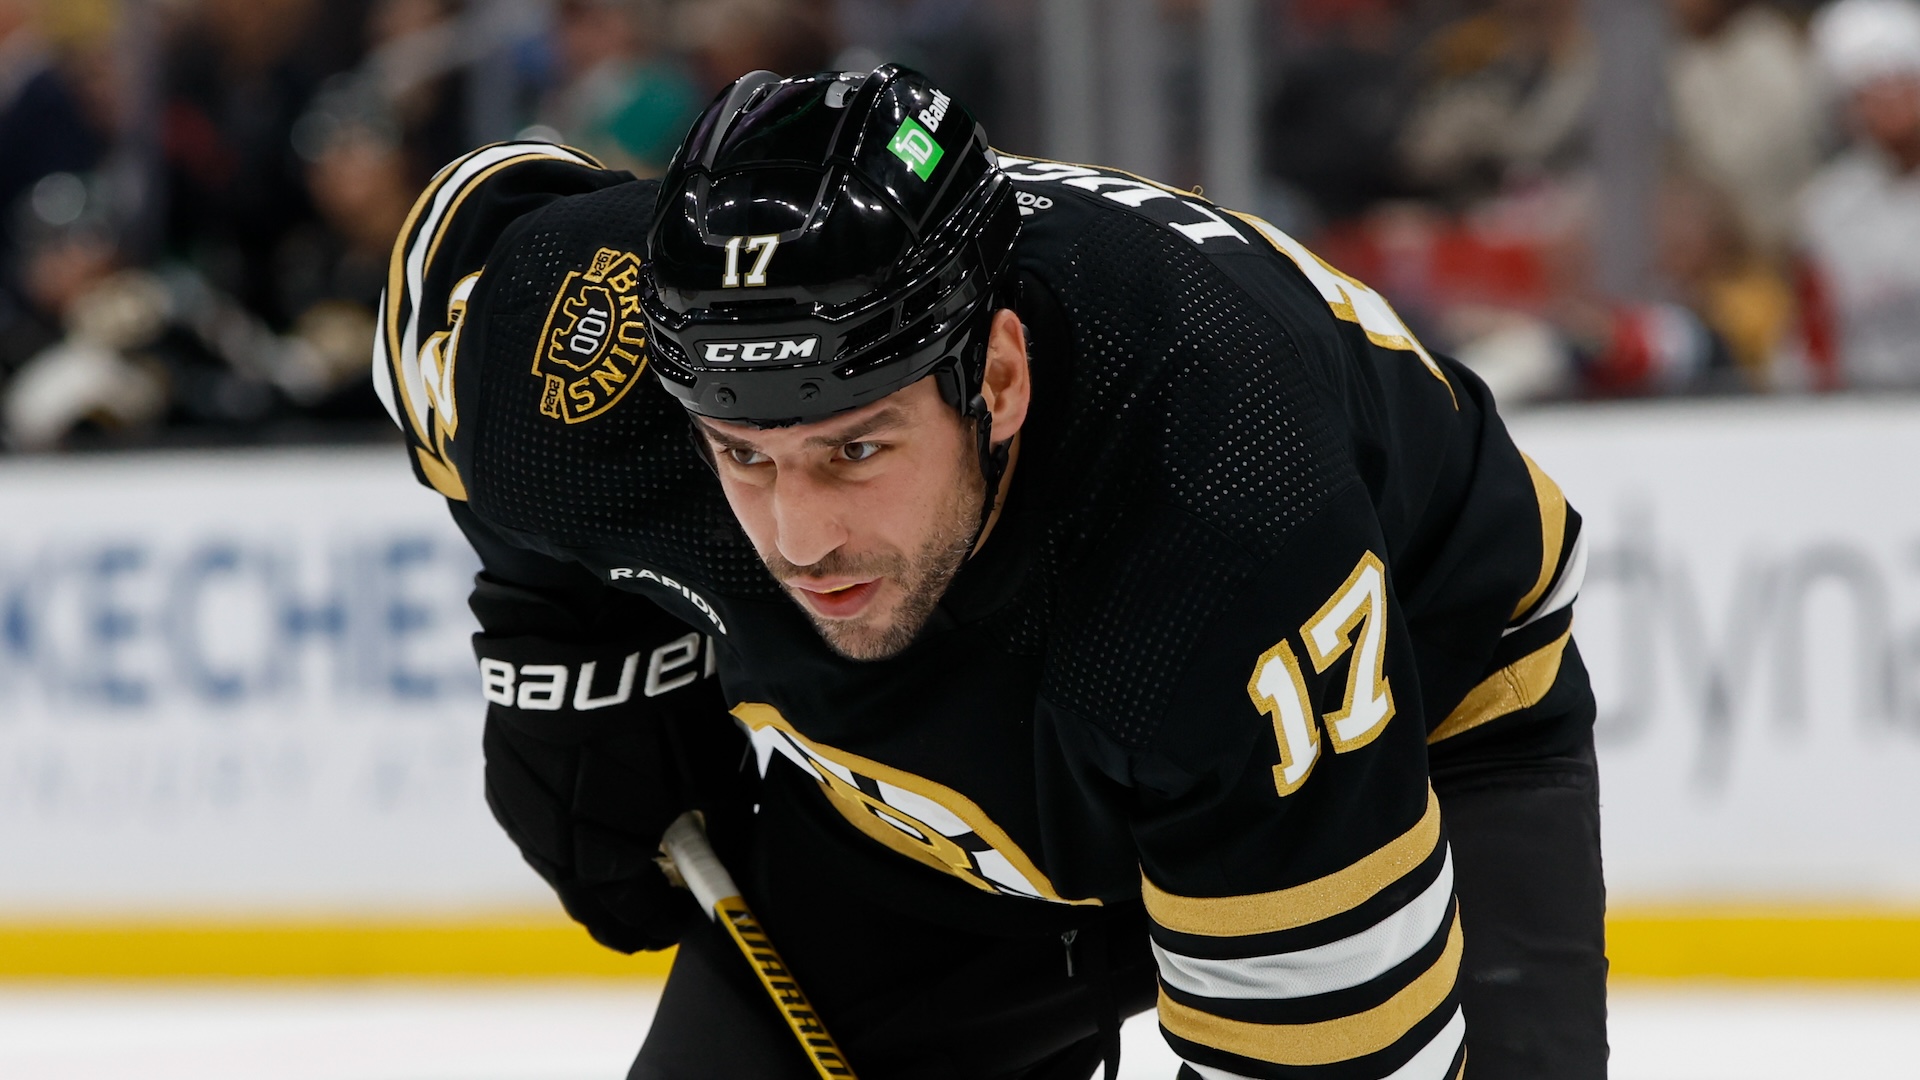 Milan Lucic file: he allegedly strangled his wife in front of his children